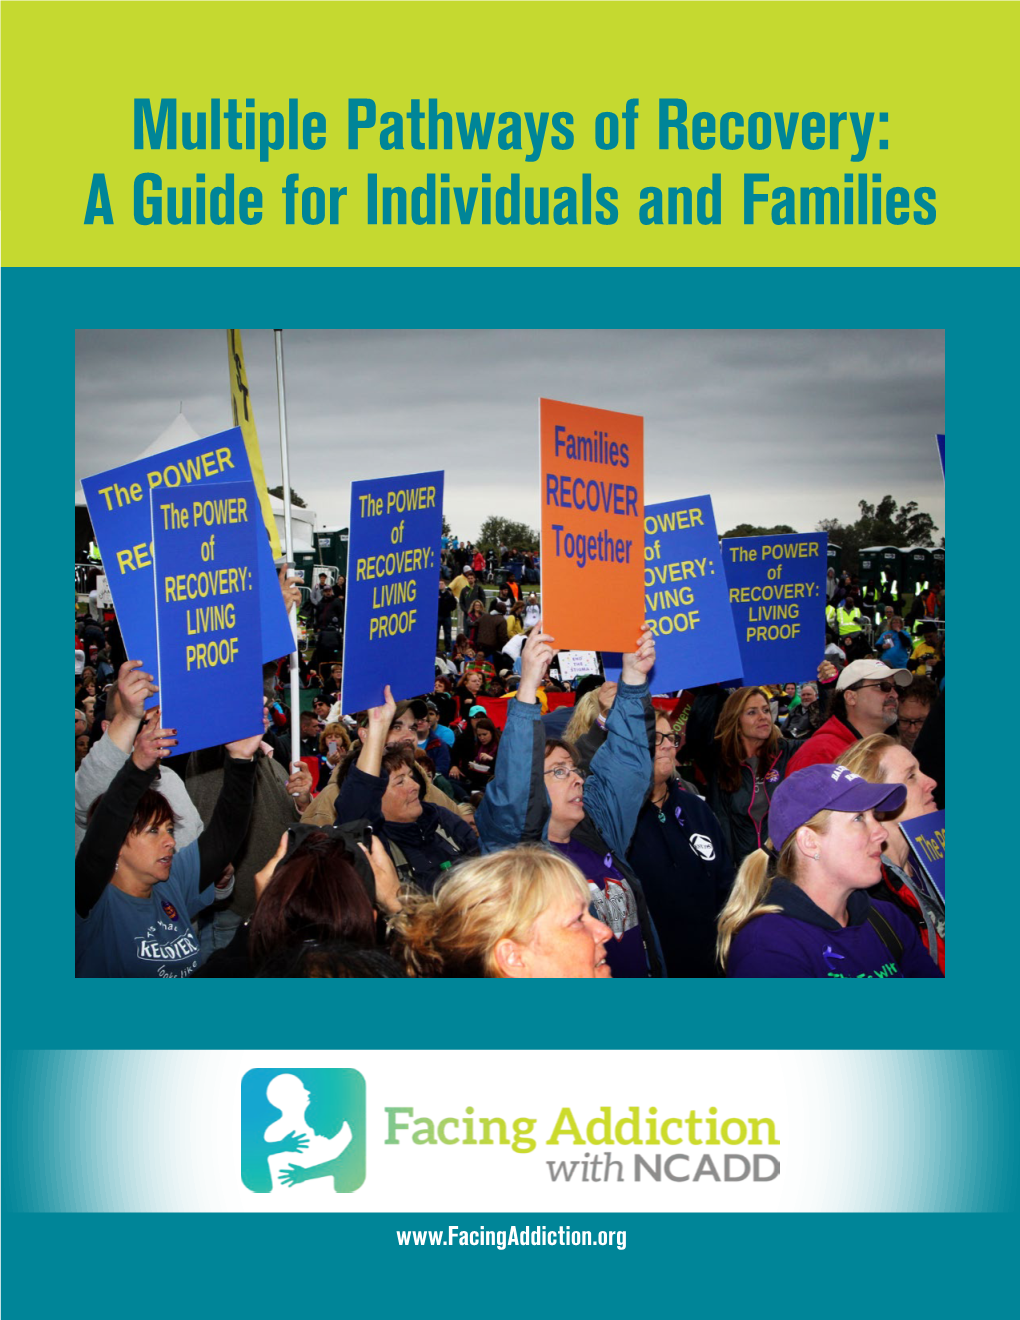 Multiple Pathways of Recovery: a Guide for Individuals and Families